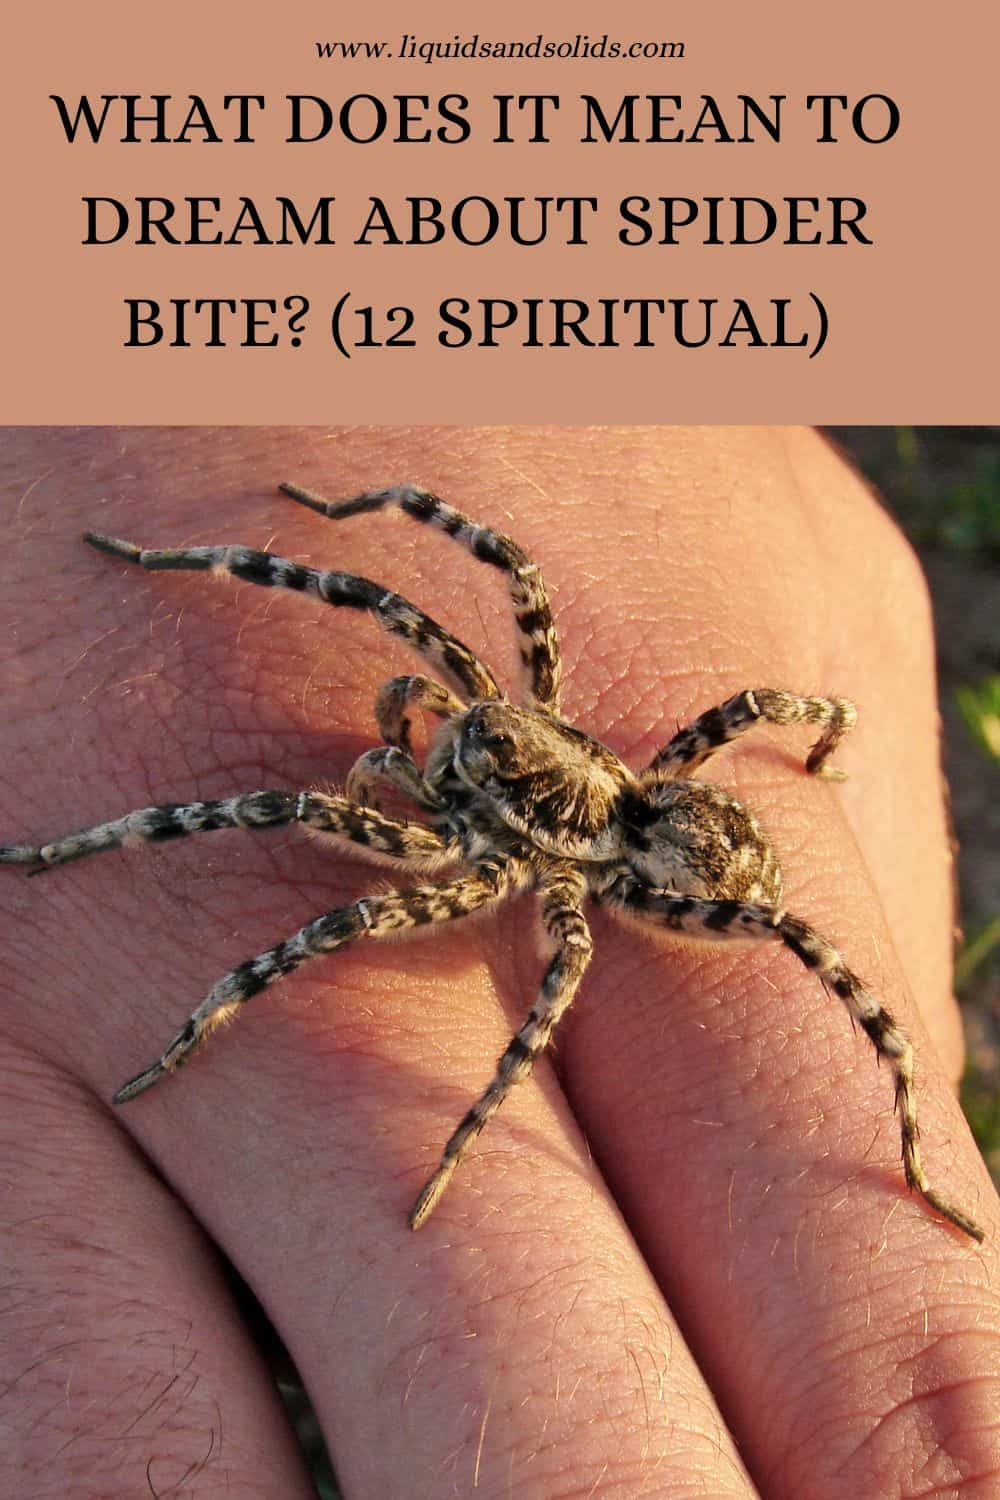 What Does It Mean To Dream About Spider Bite? (12 Spiritual)